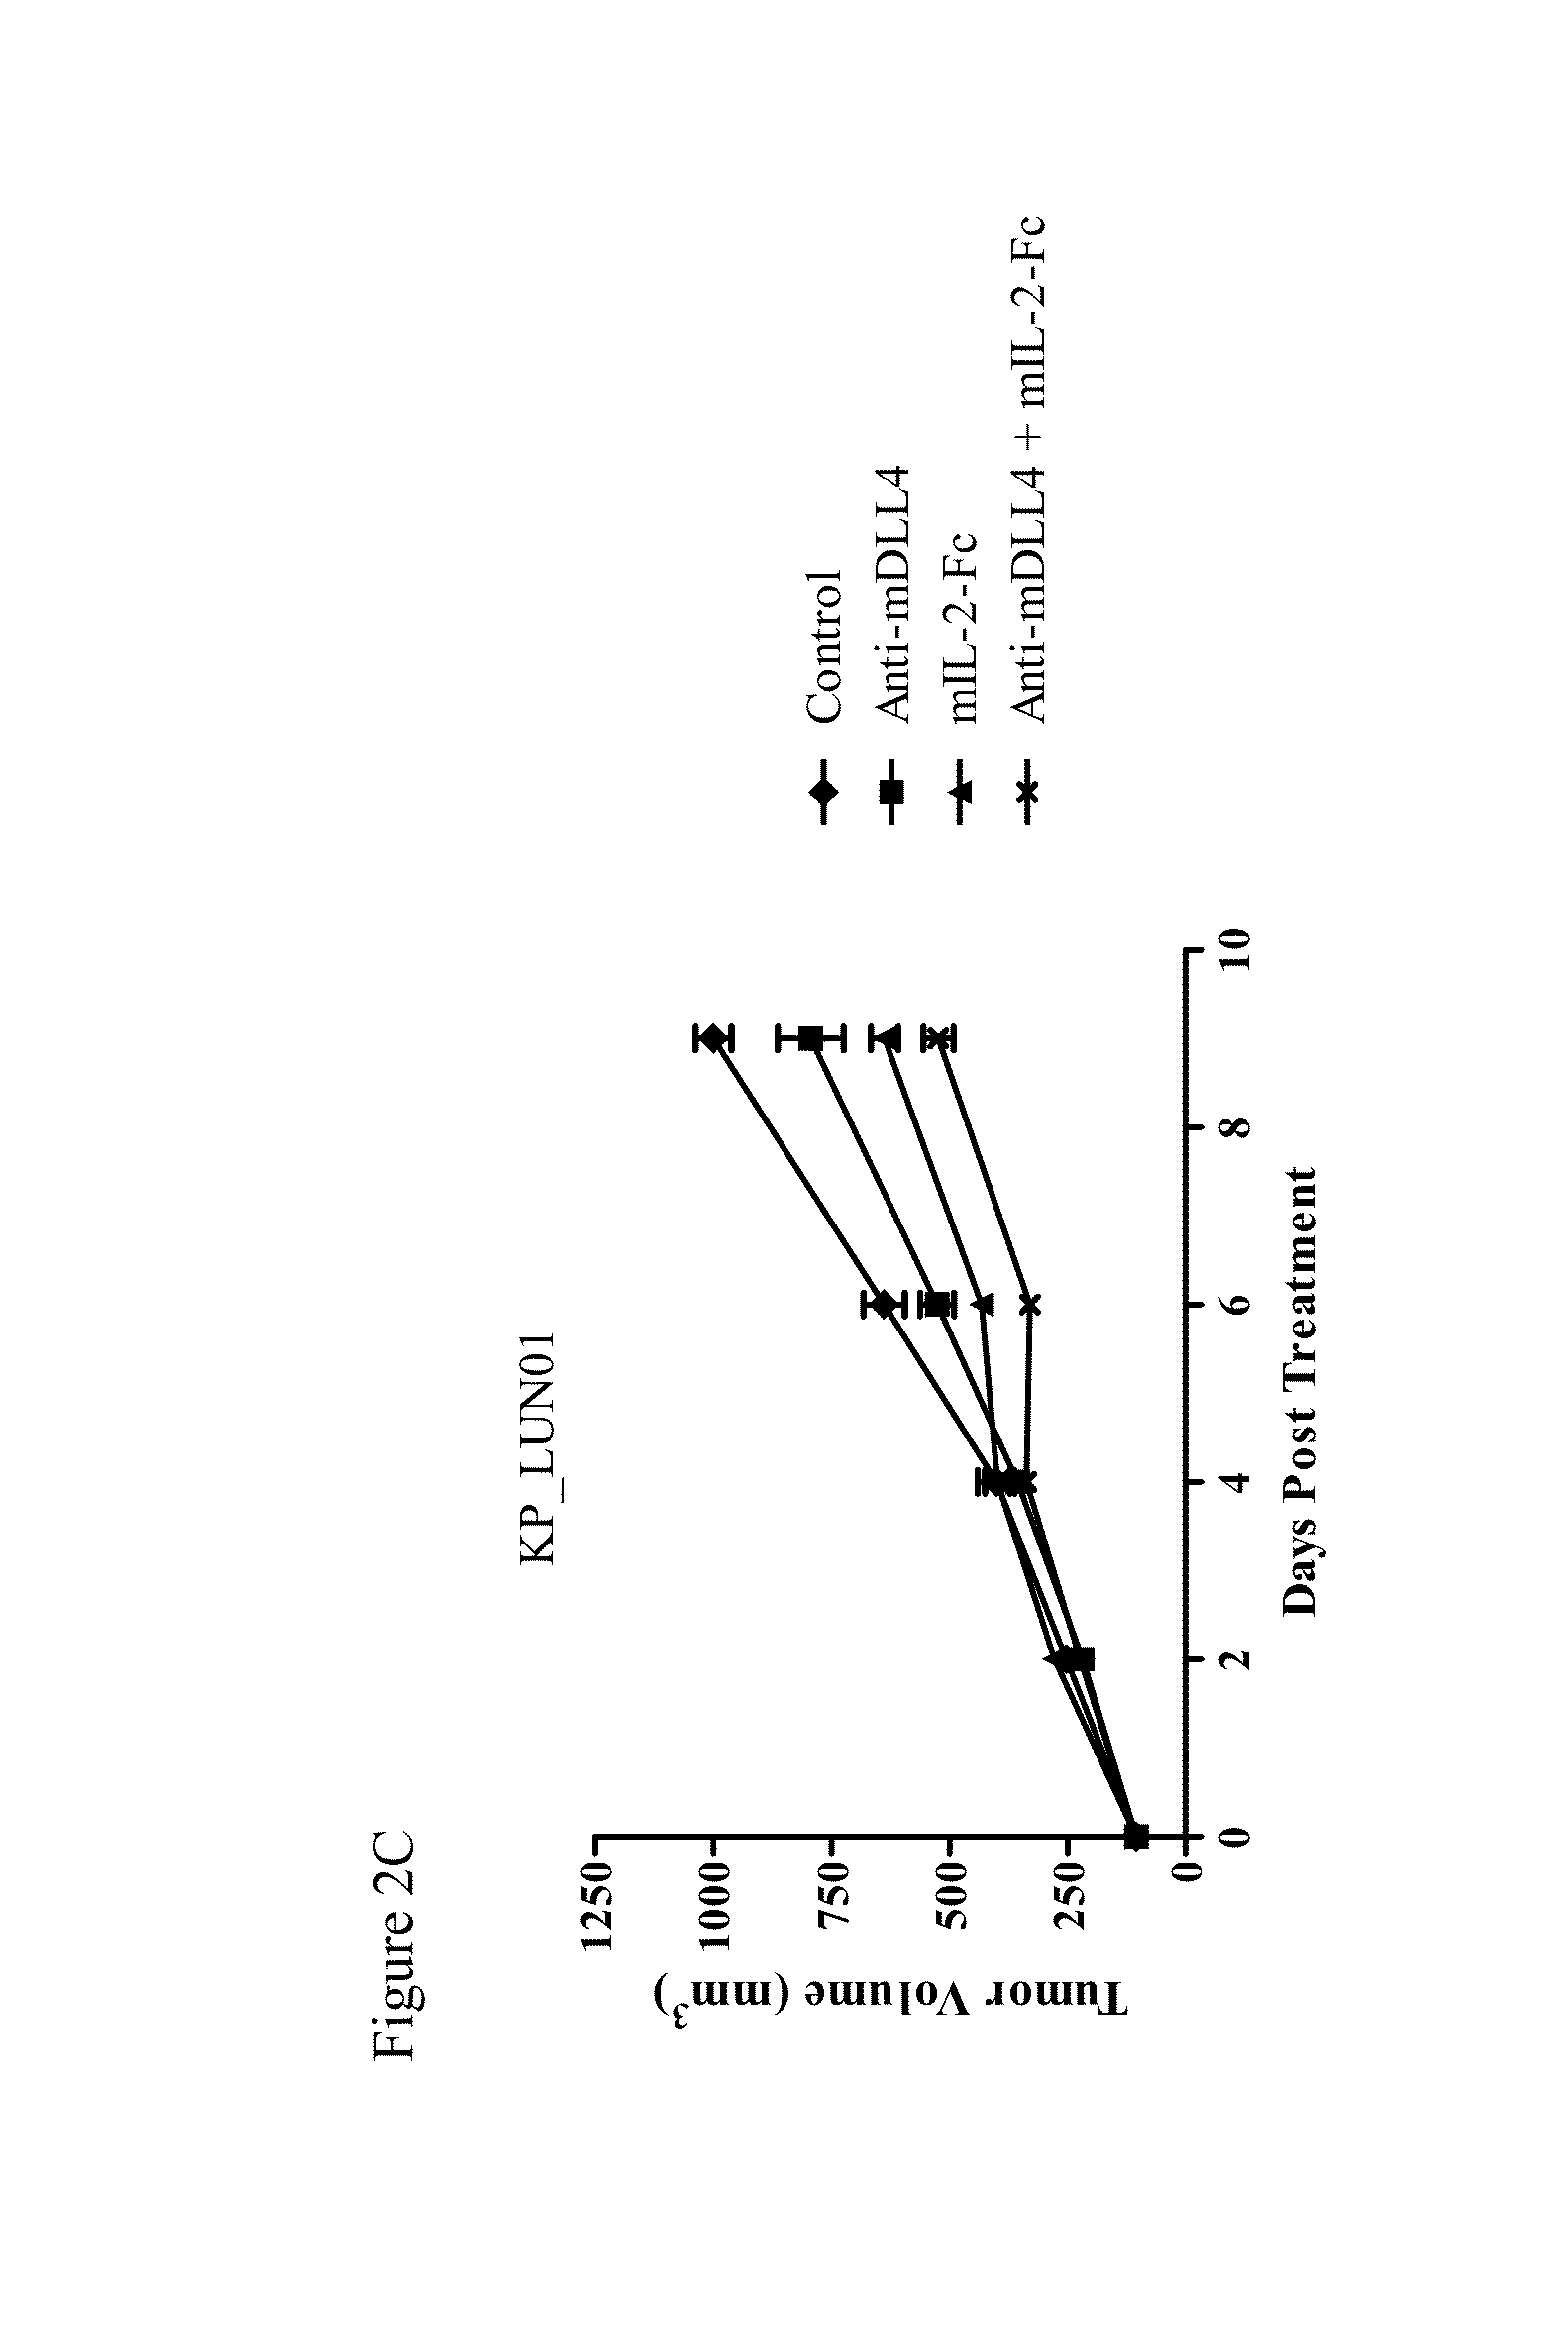 Combination Therapy For Treatment Of Disease